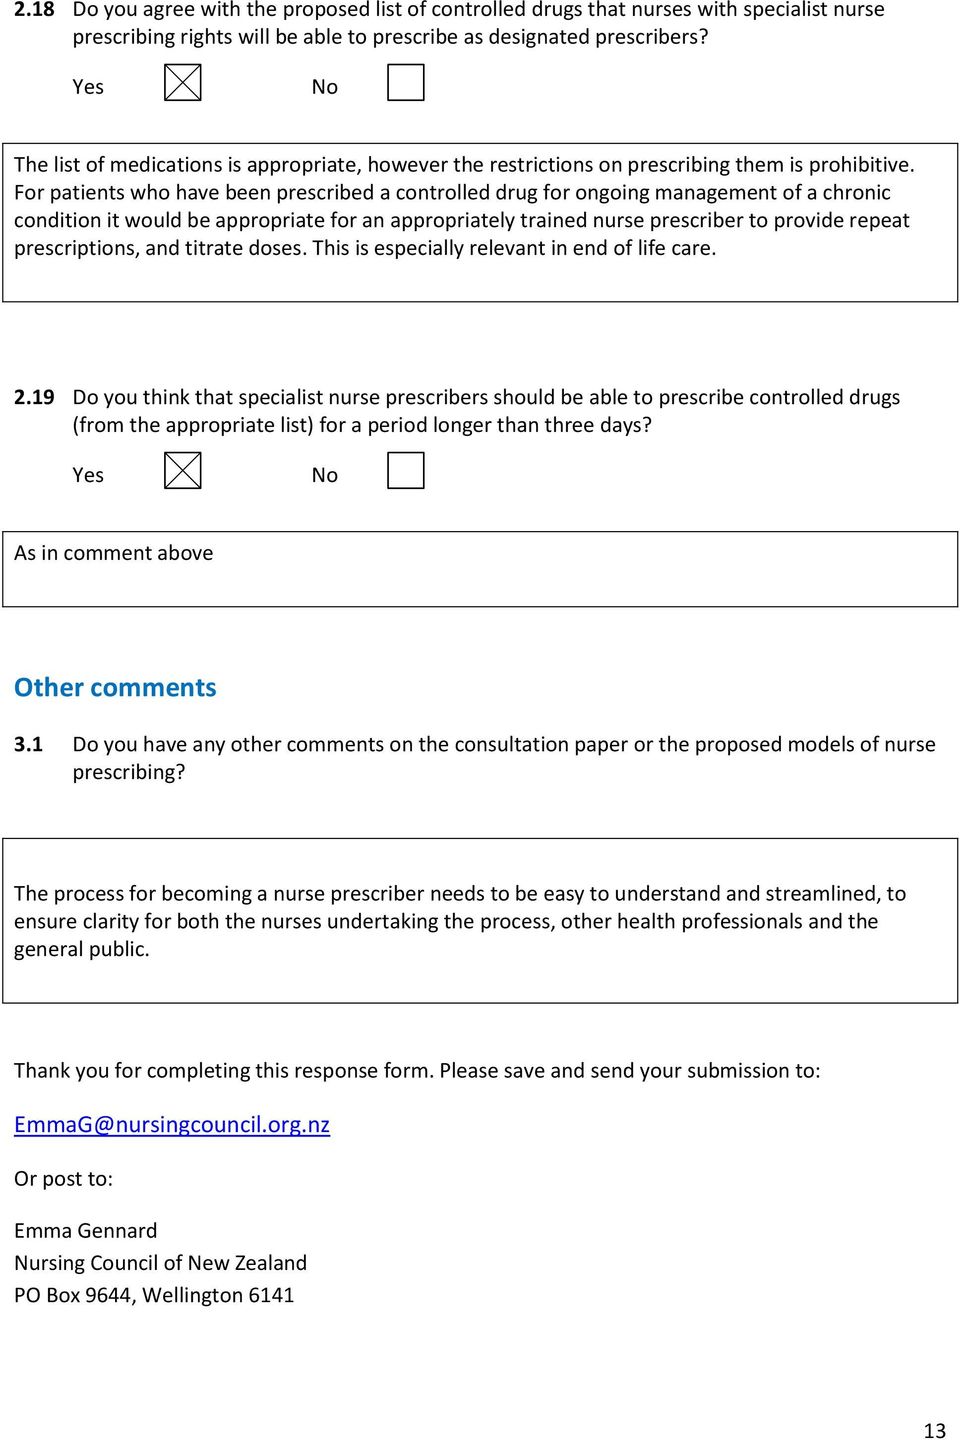 For patients who have been prescribed a controlled drug for ongoing management of a chronic condition it would be appropriate for an appropriately trained nurse prescriber to provide repeat